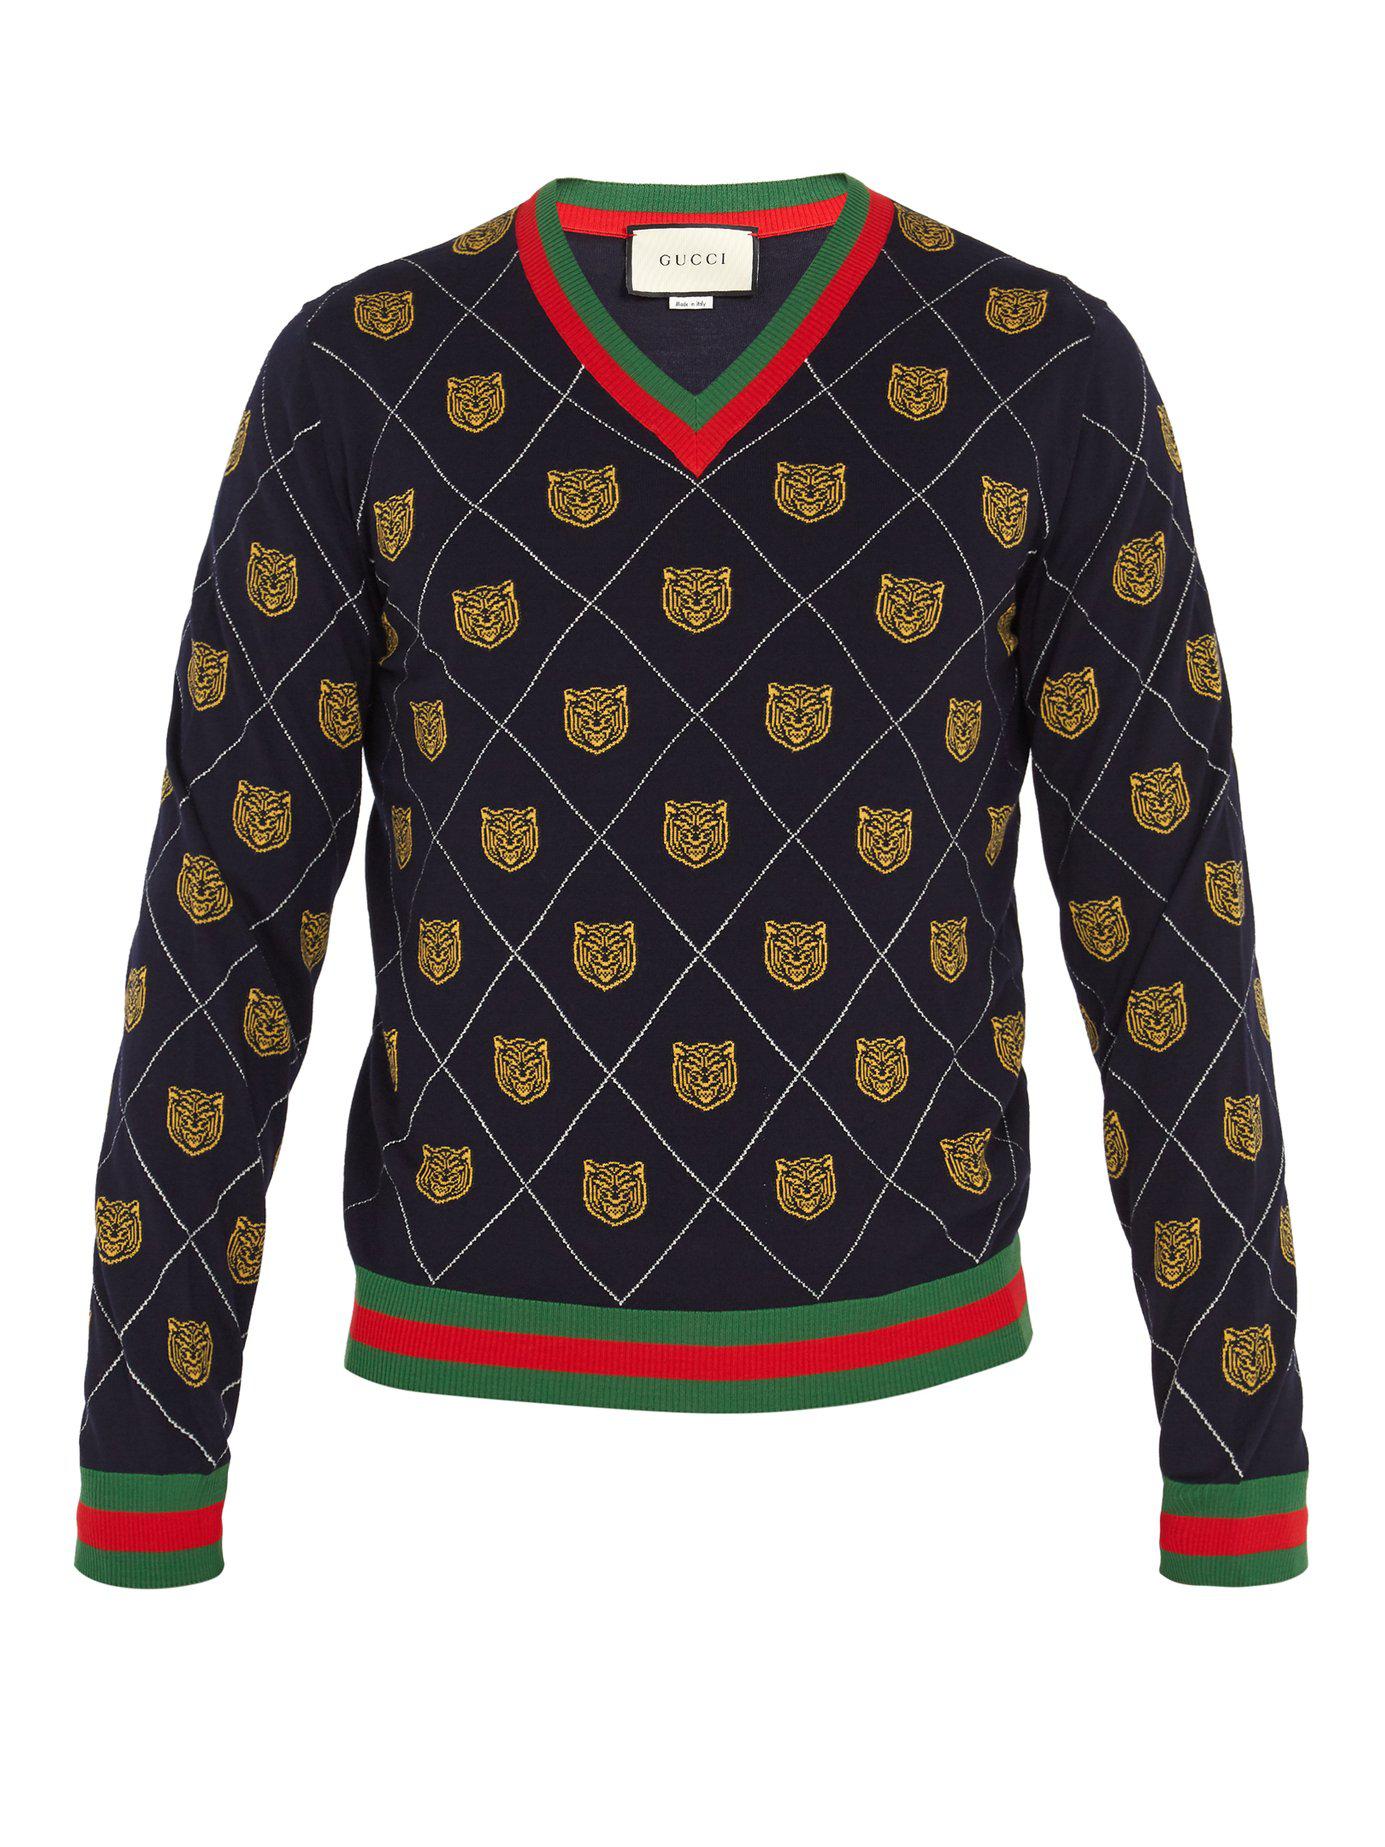 Gucci Tiger-intarsia Wool Sweater in Blue for Men